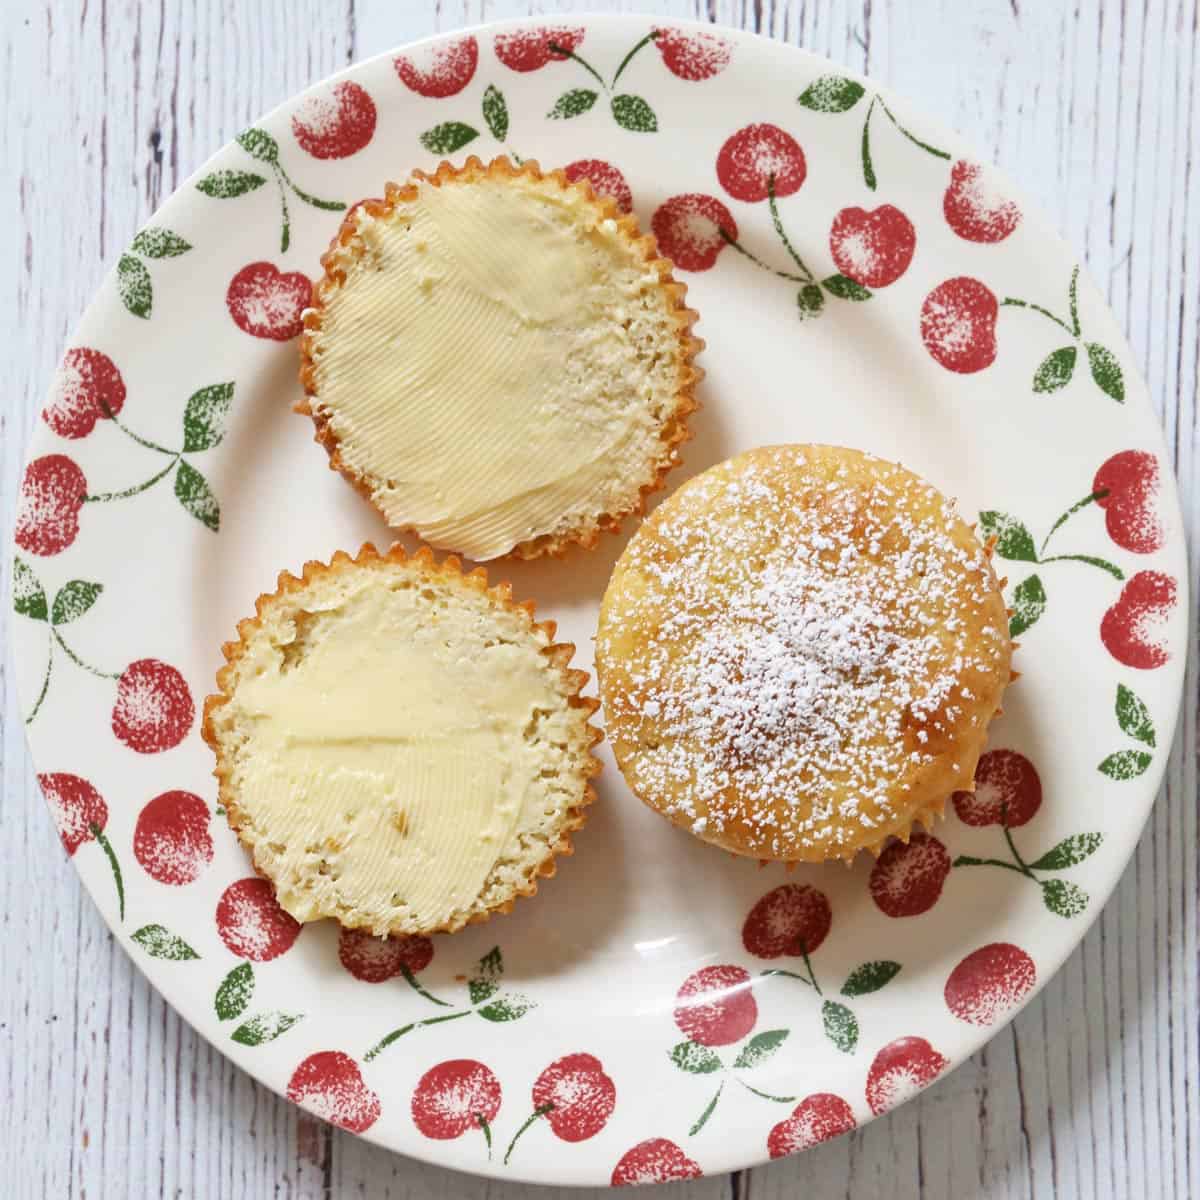 Almond flour muffins are topped with butter.